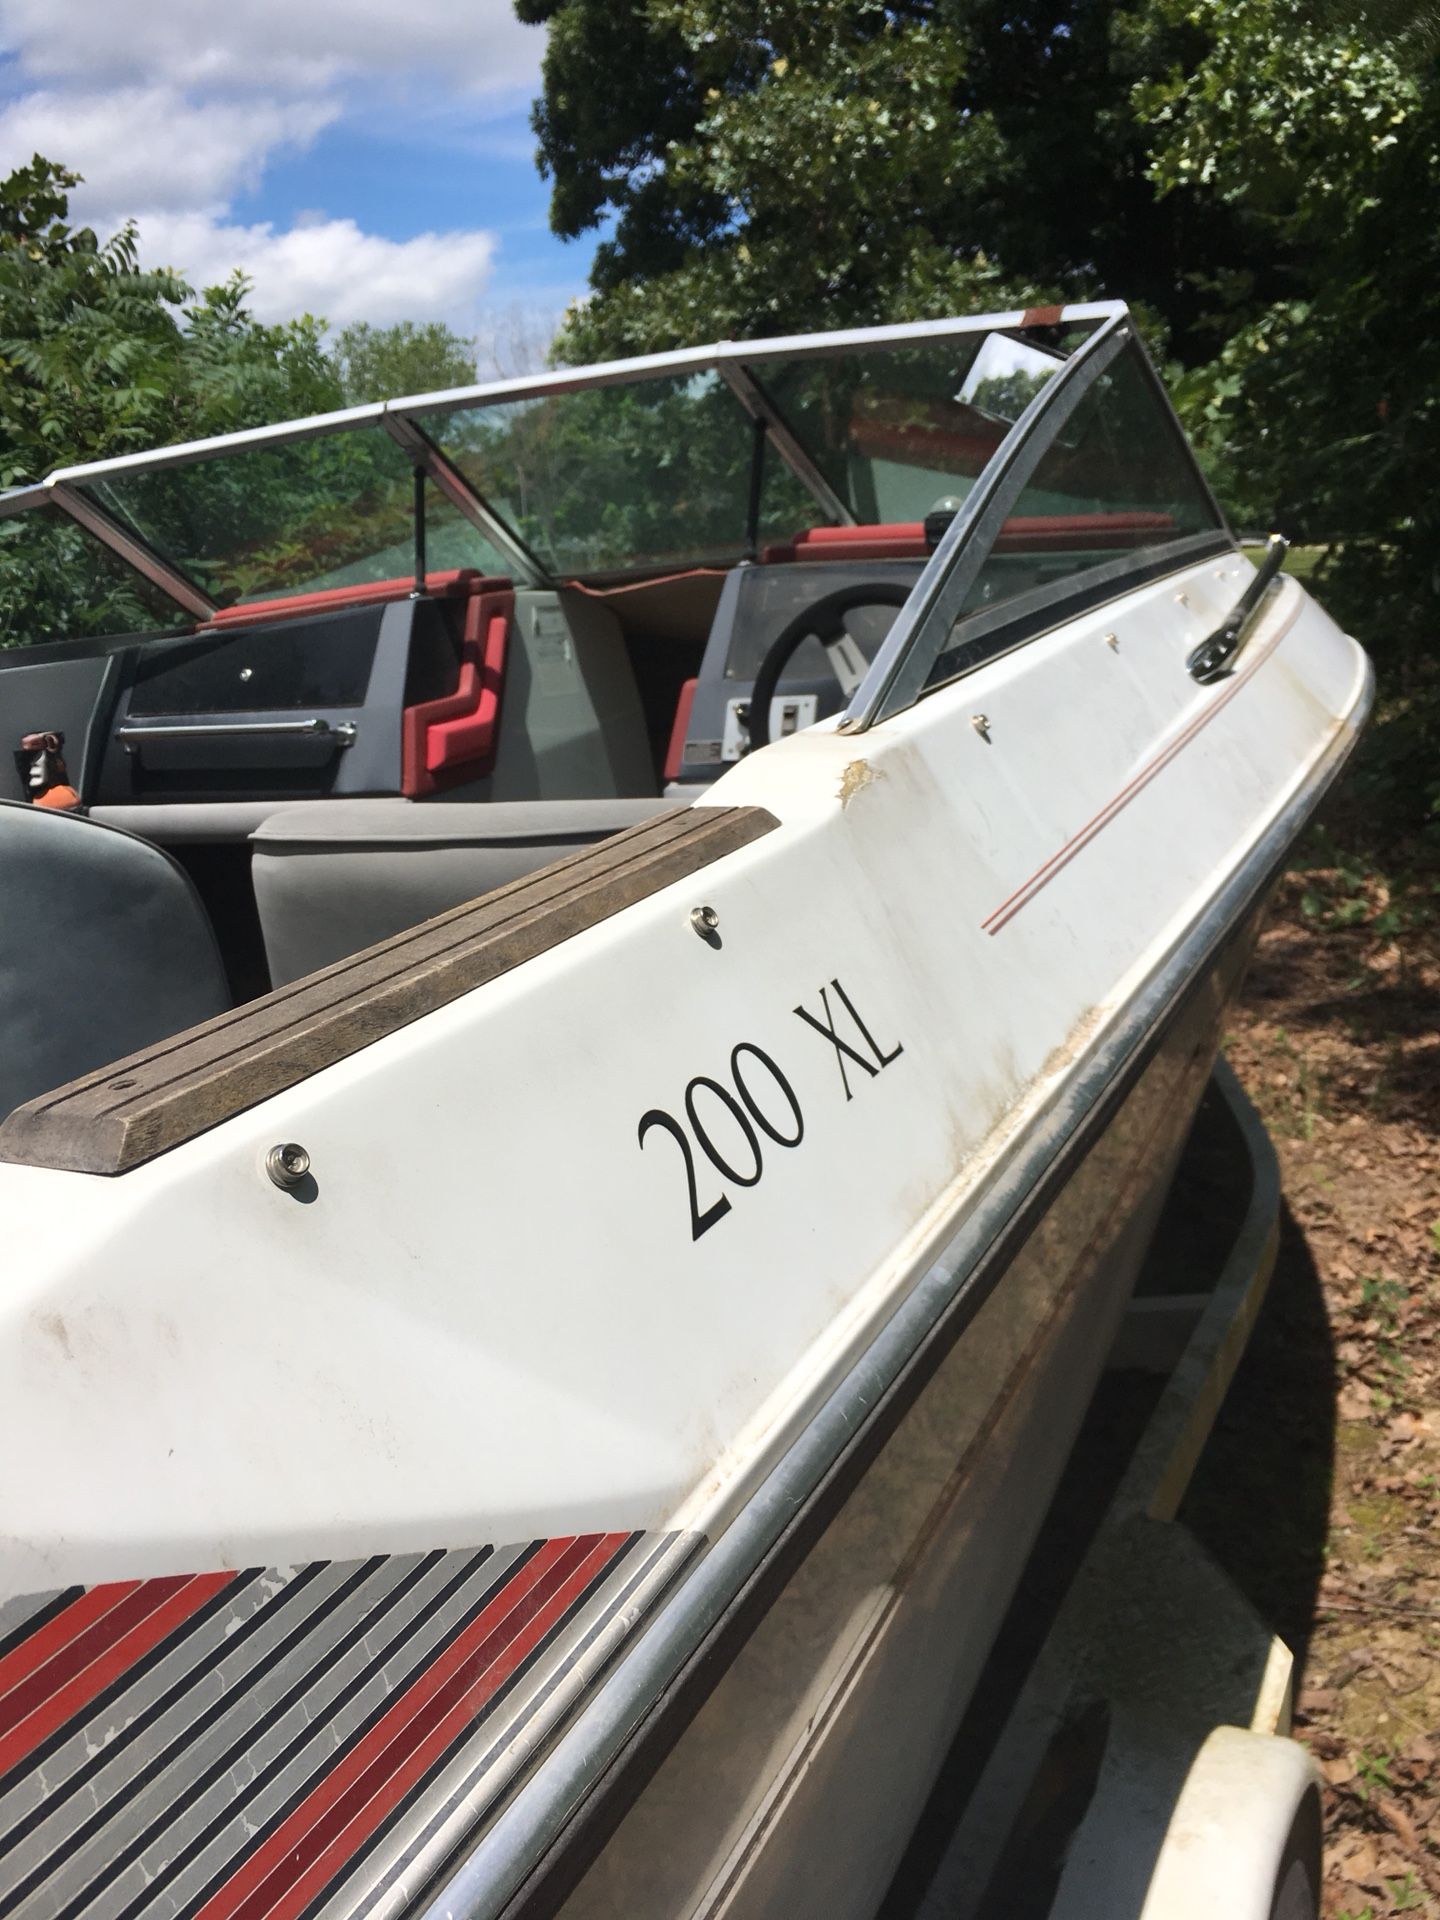 200 XL boat with trailer $950.00 obo